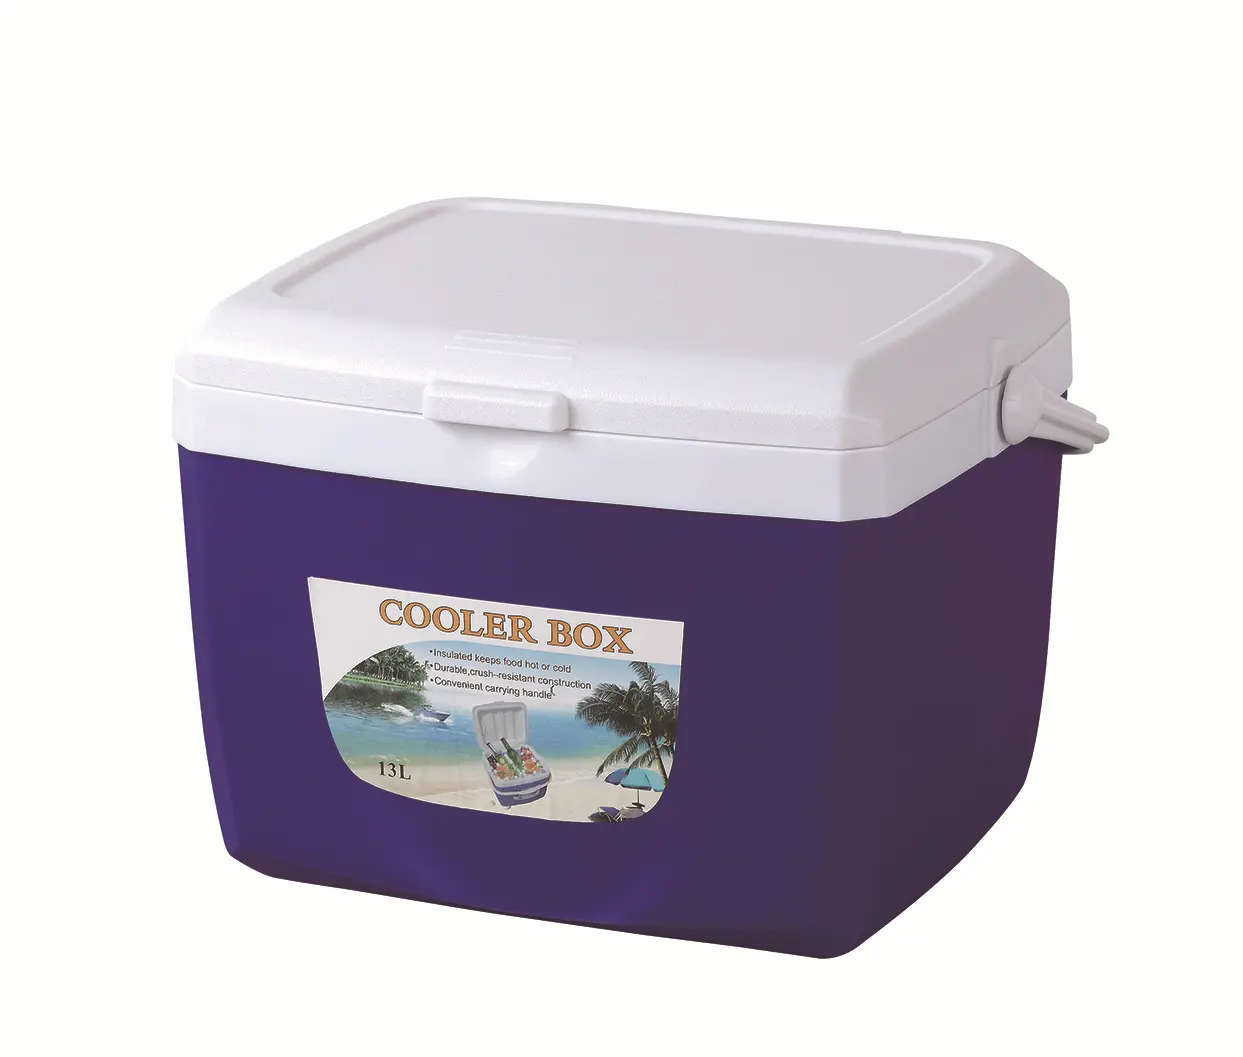 Hot selling portable large capacity 5L 13L 27L 45L plastic ice chest cooler box sets for food, drink, cans, beer